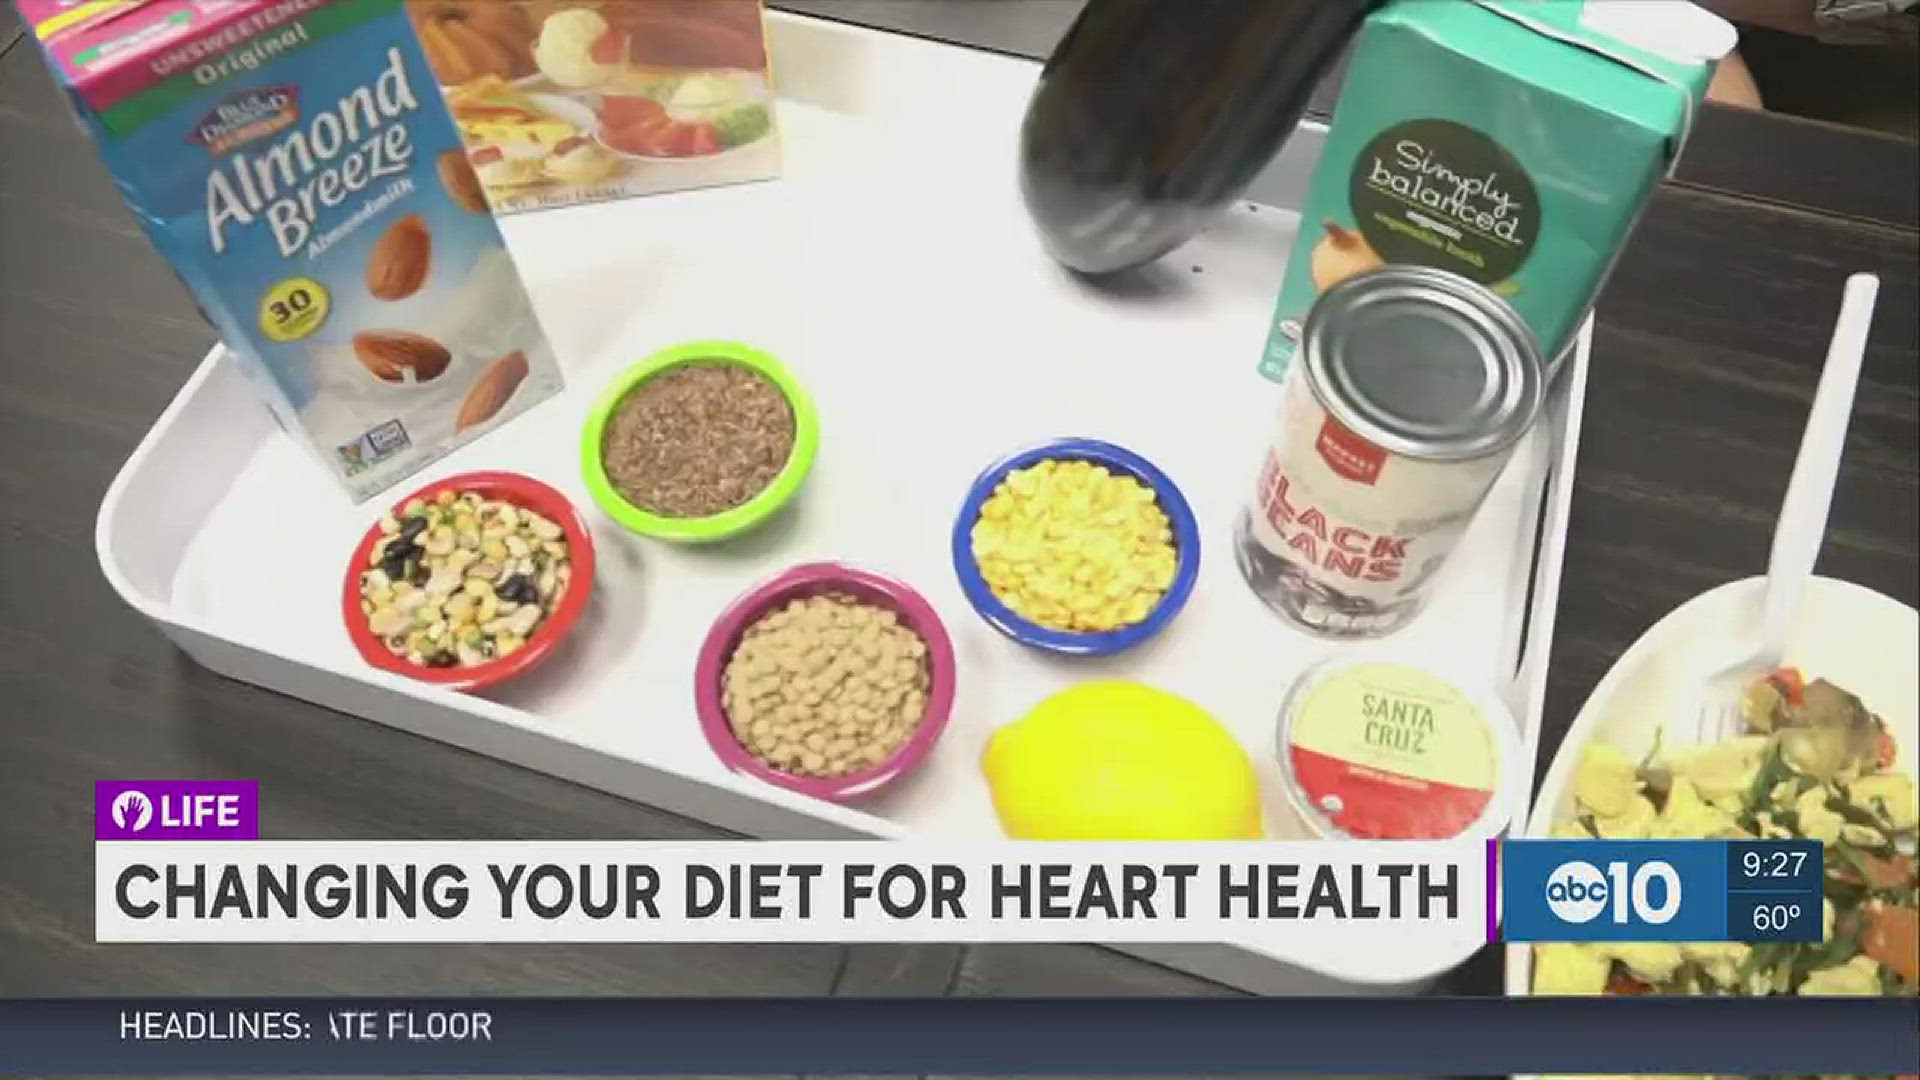 Mellisa Paul talks with Dr. Rajiv Misquitta to learn how a plant-based diet can help reduce the risk of heart disease.